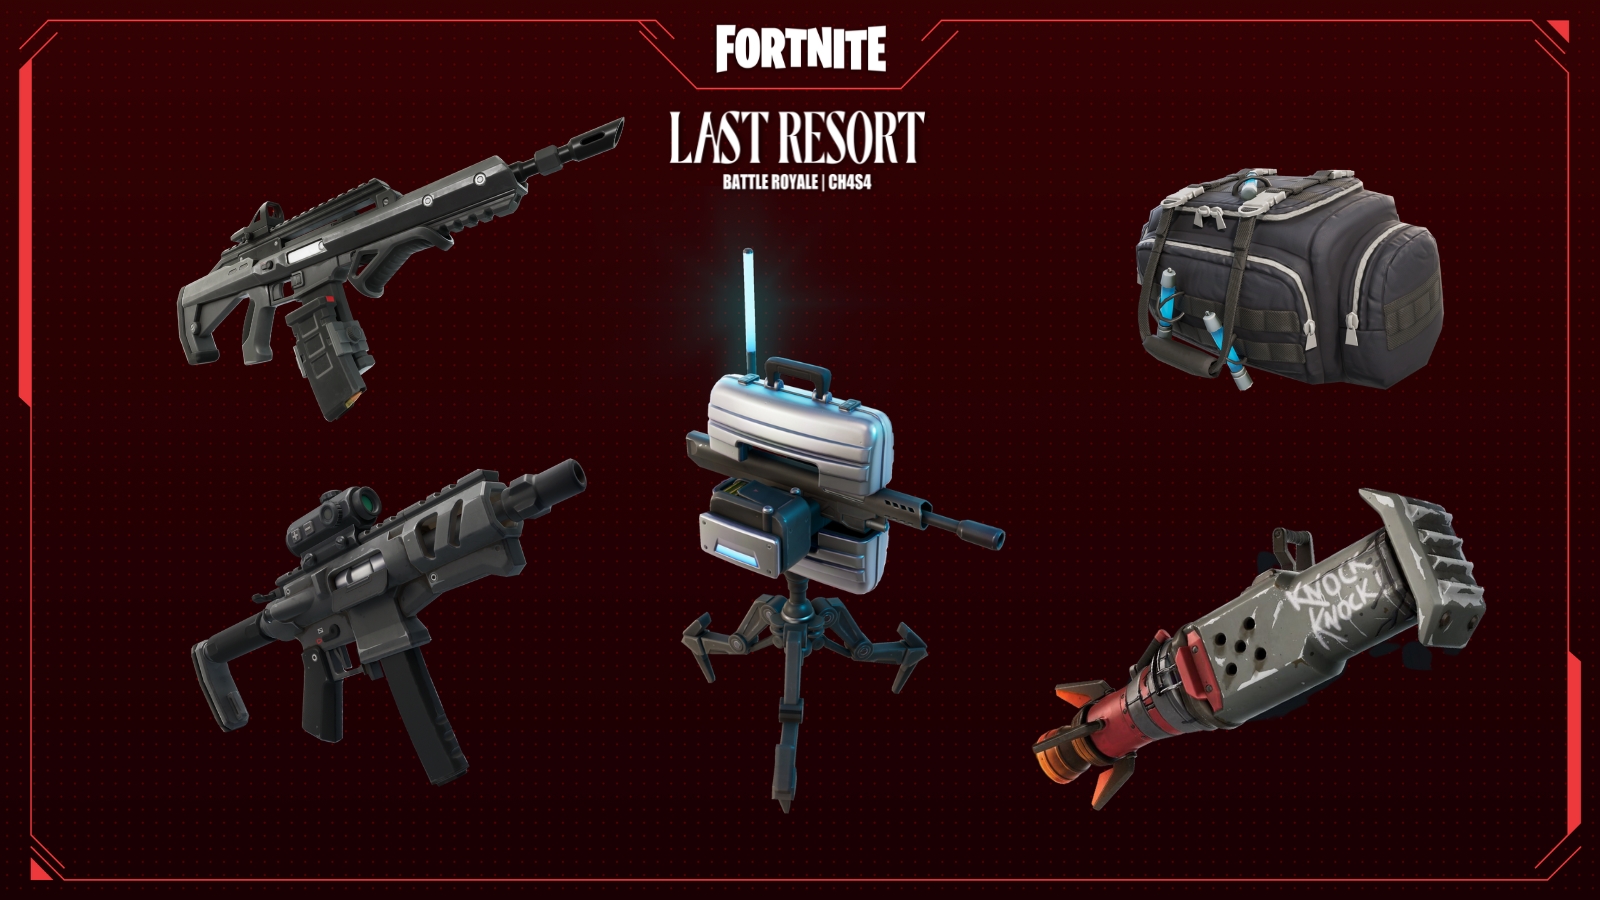 All Fortnite new weapons (Season 7), unvaulted, vaulted weapons and items